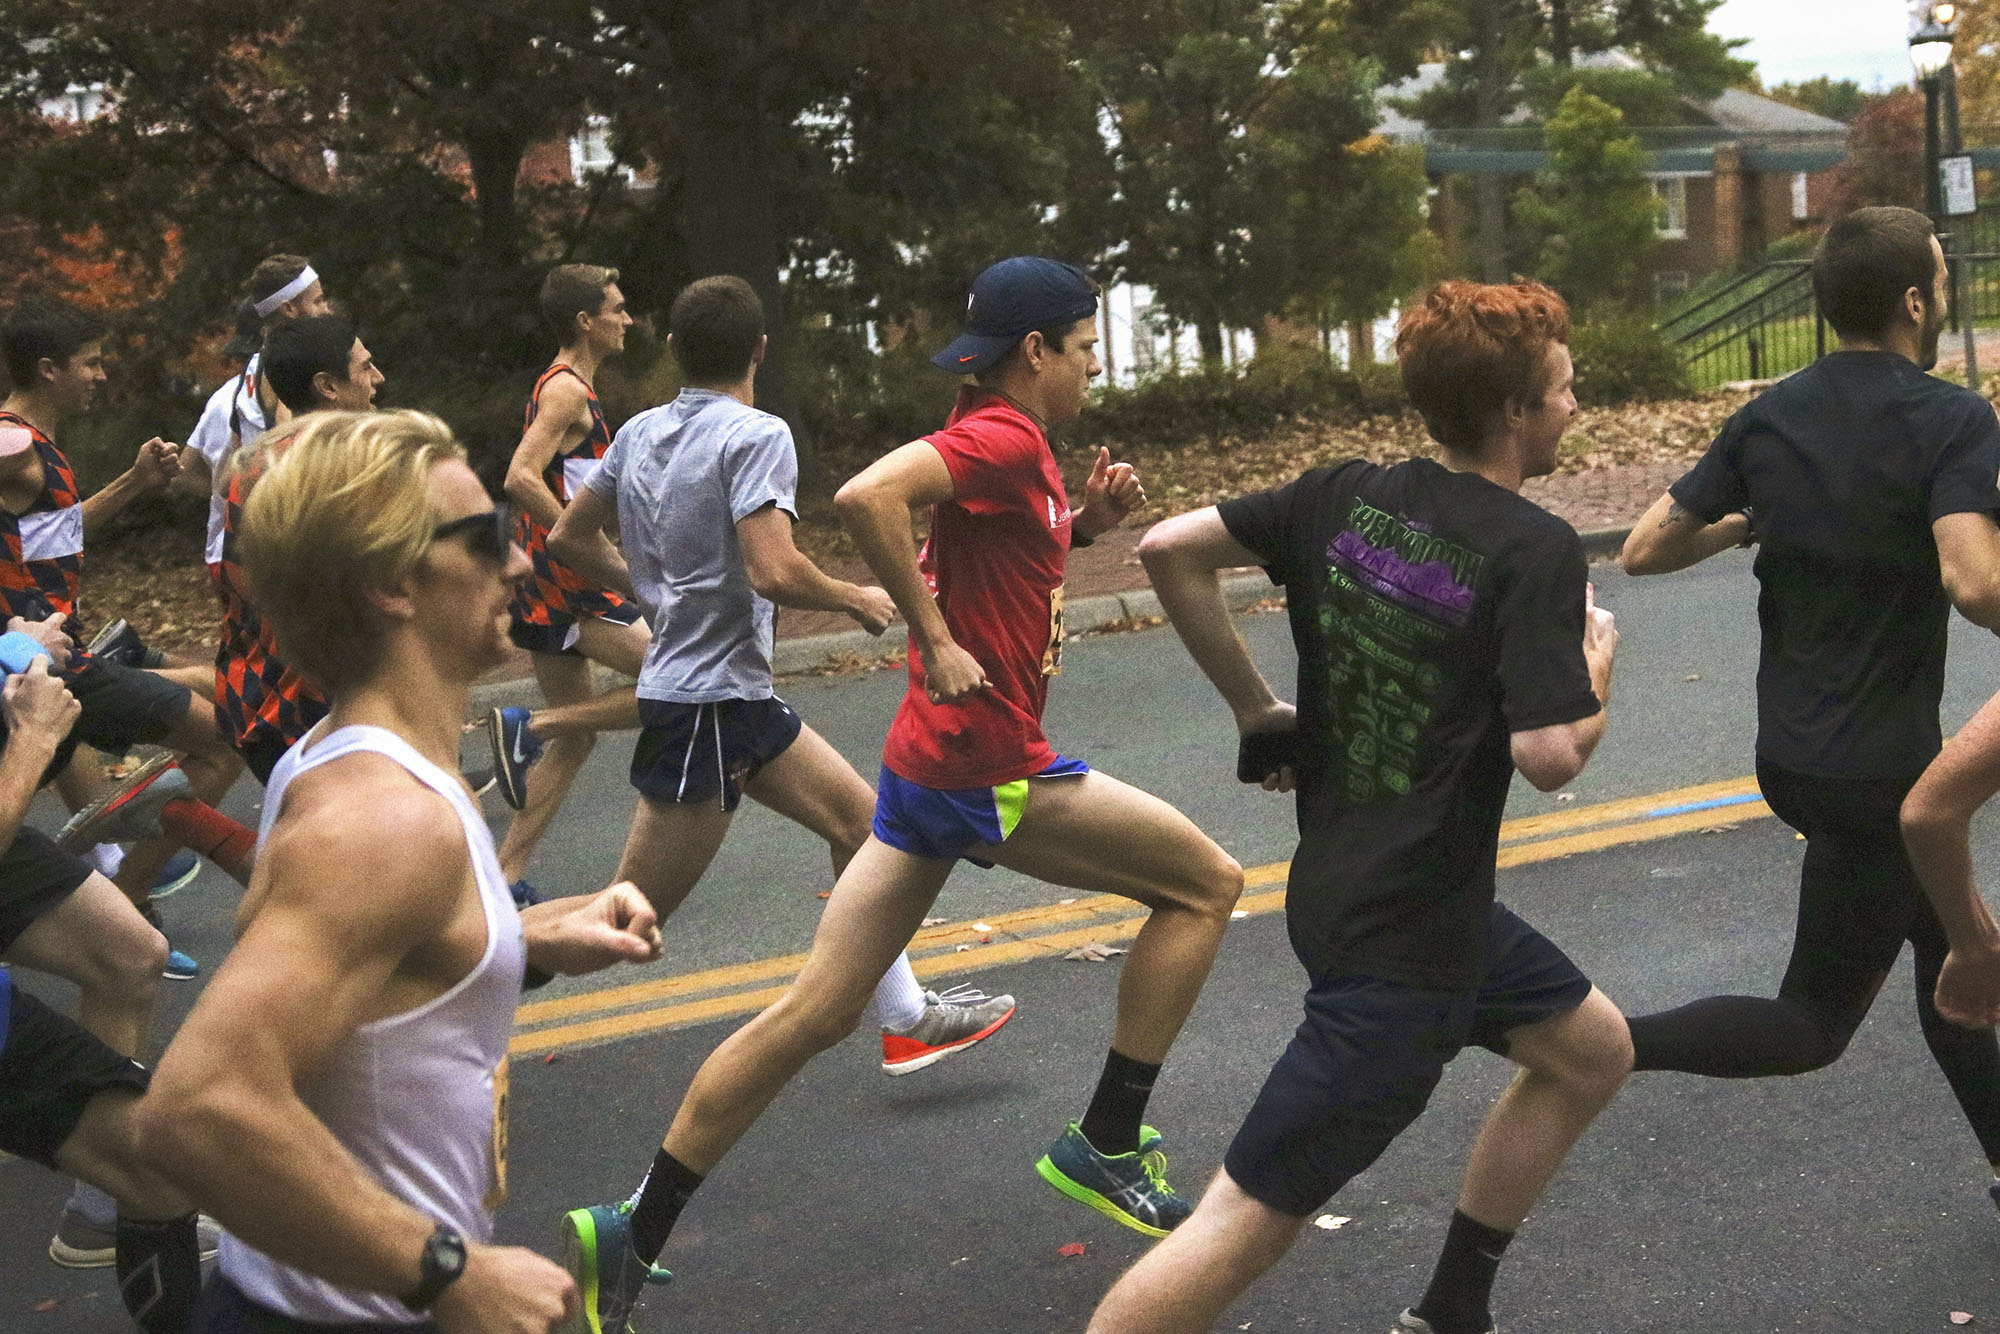 Students running the 4th year 5K on a road